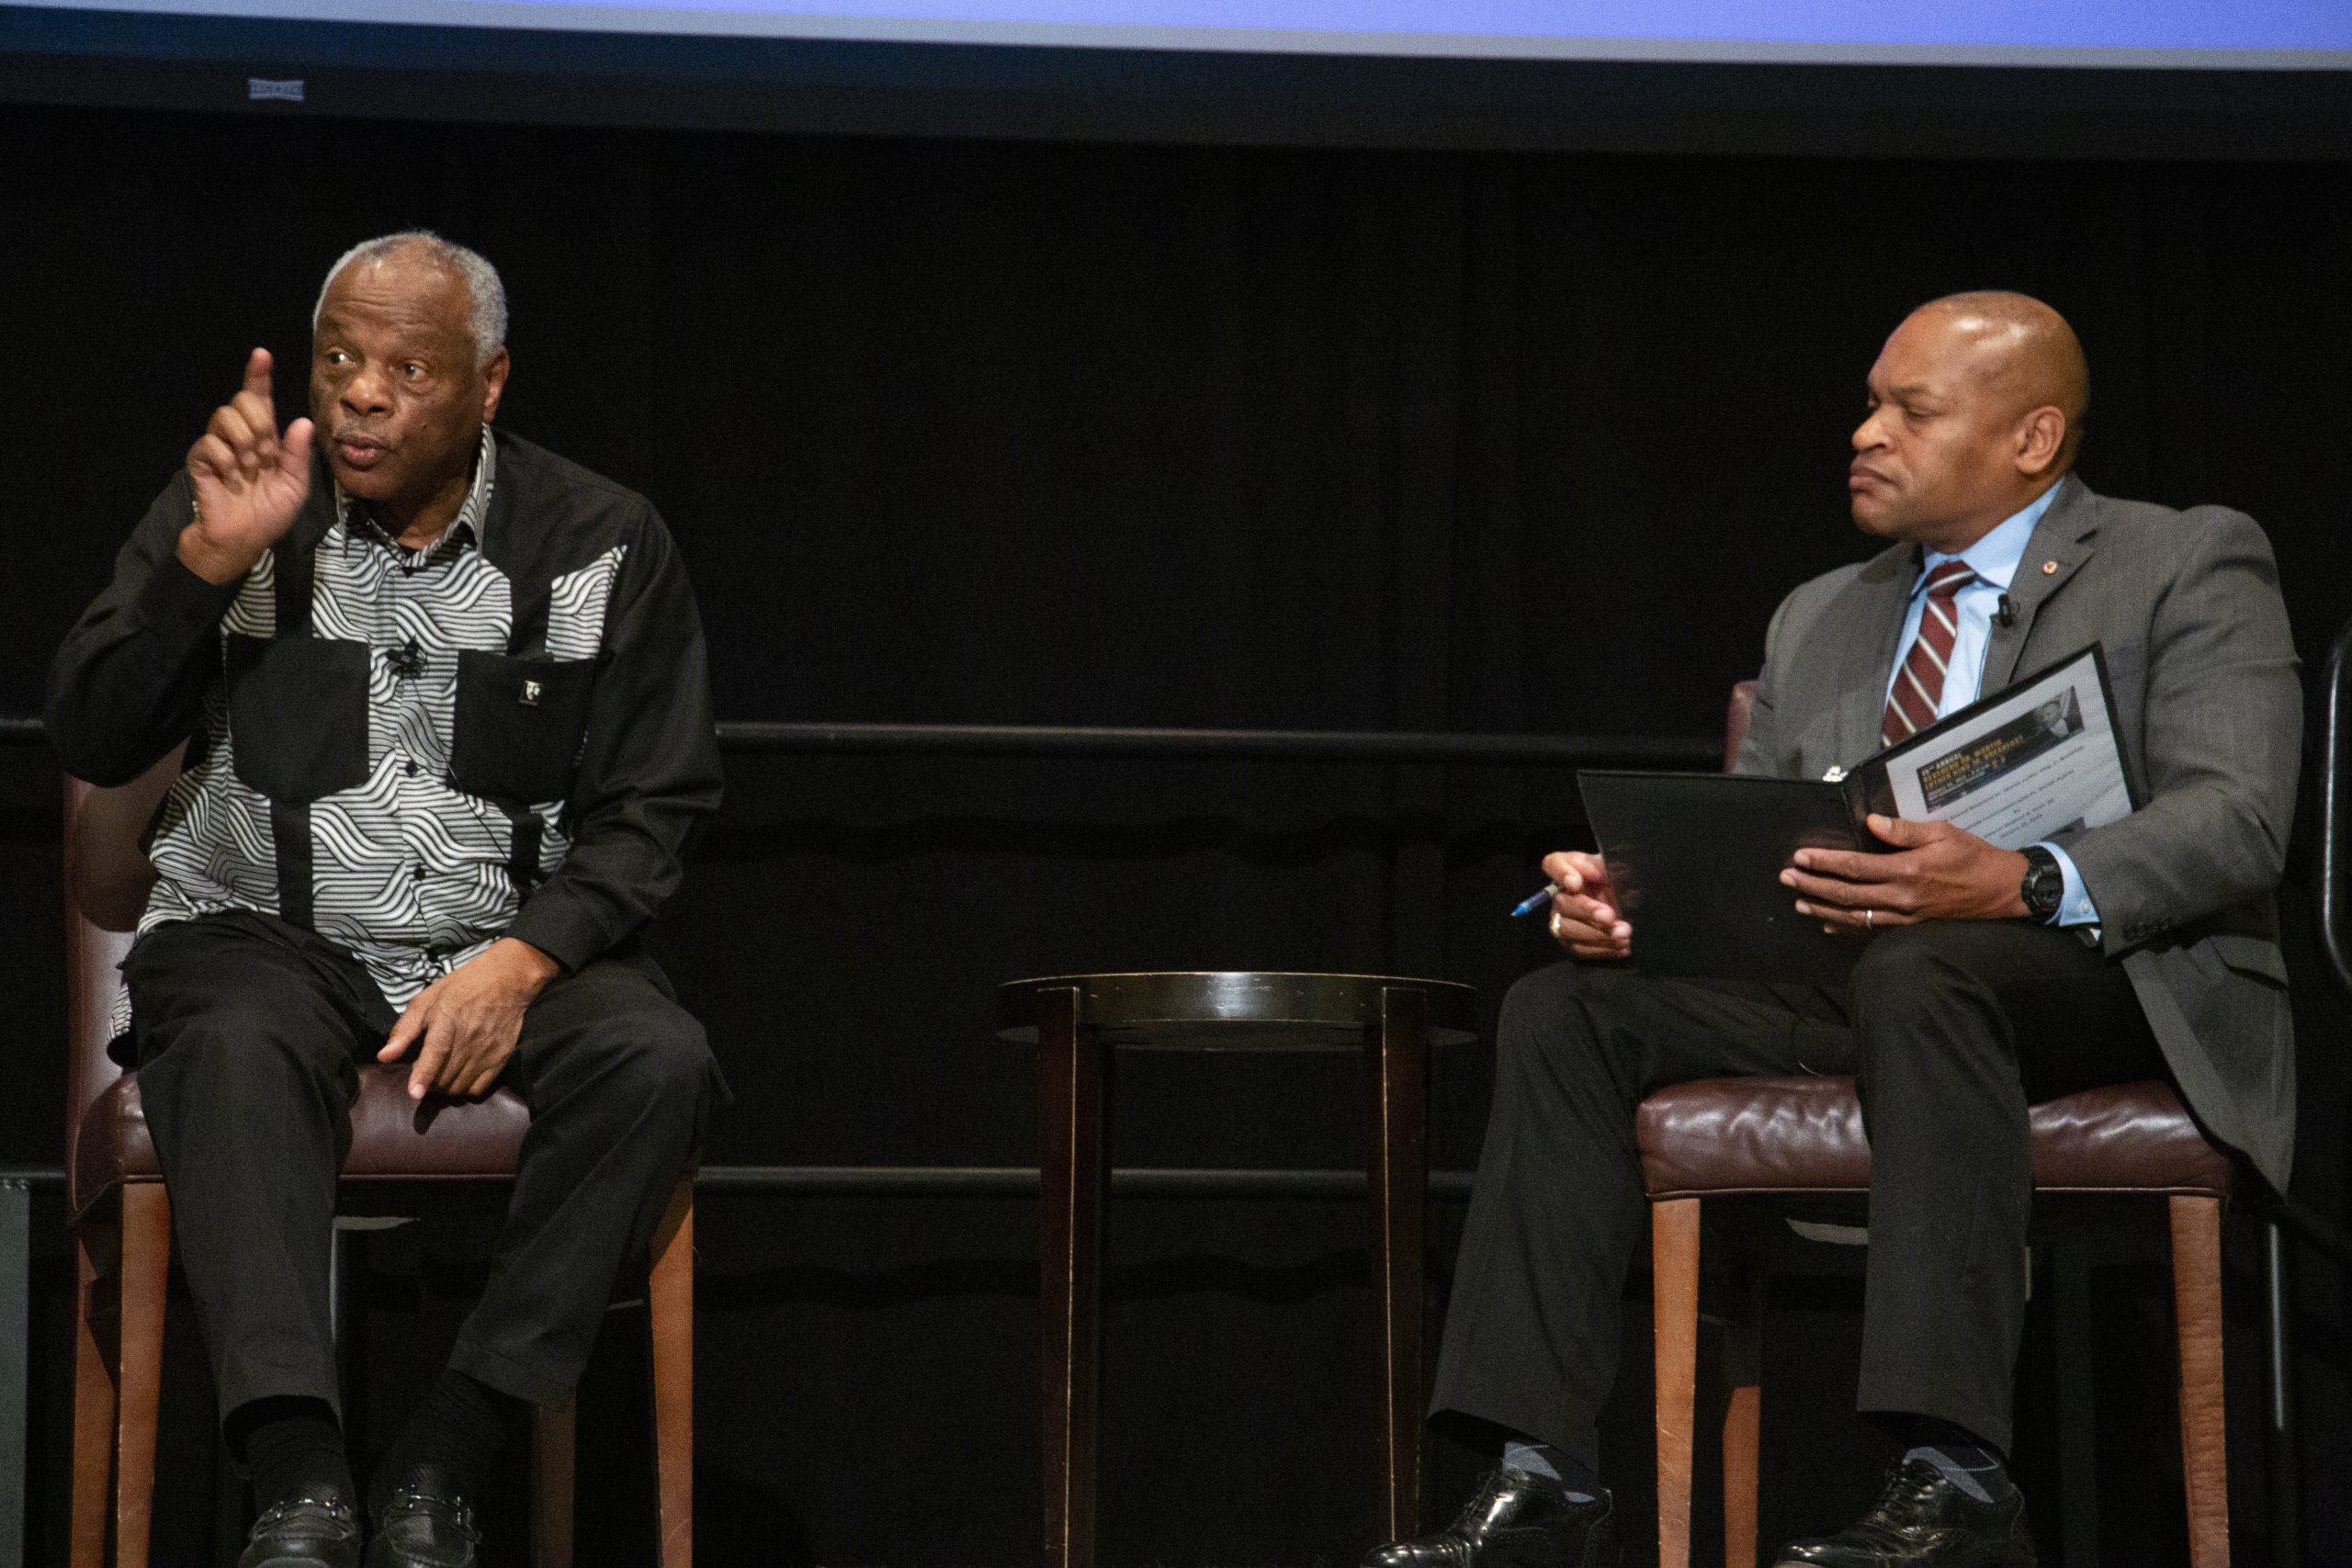 Dr. Asante and Col. Ruth discussing questions asked during the 15th annual Reverend Dr. Martin Luther King, Jr. Breakfast at Texas A&M University. Hosted by MSC WBAC.